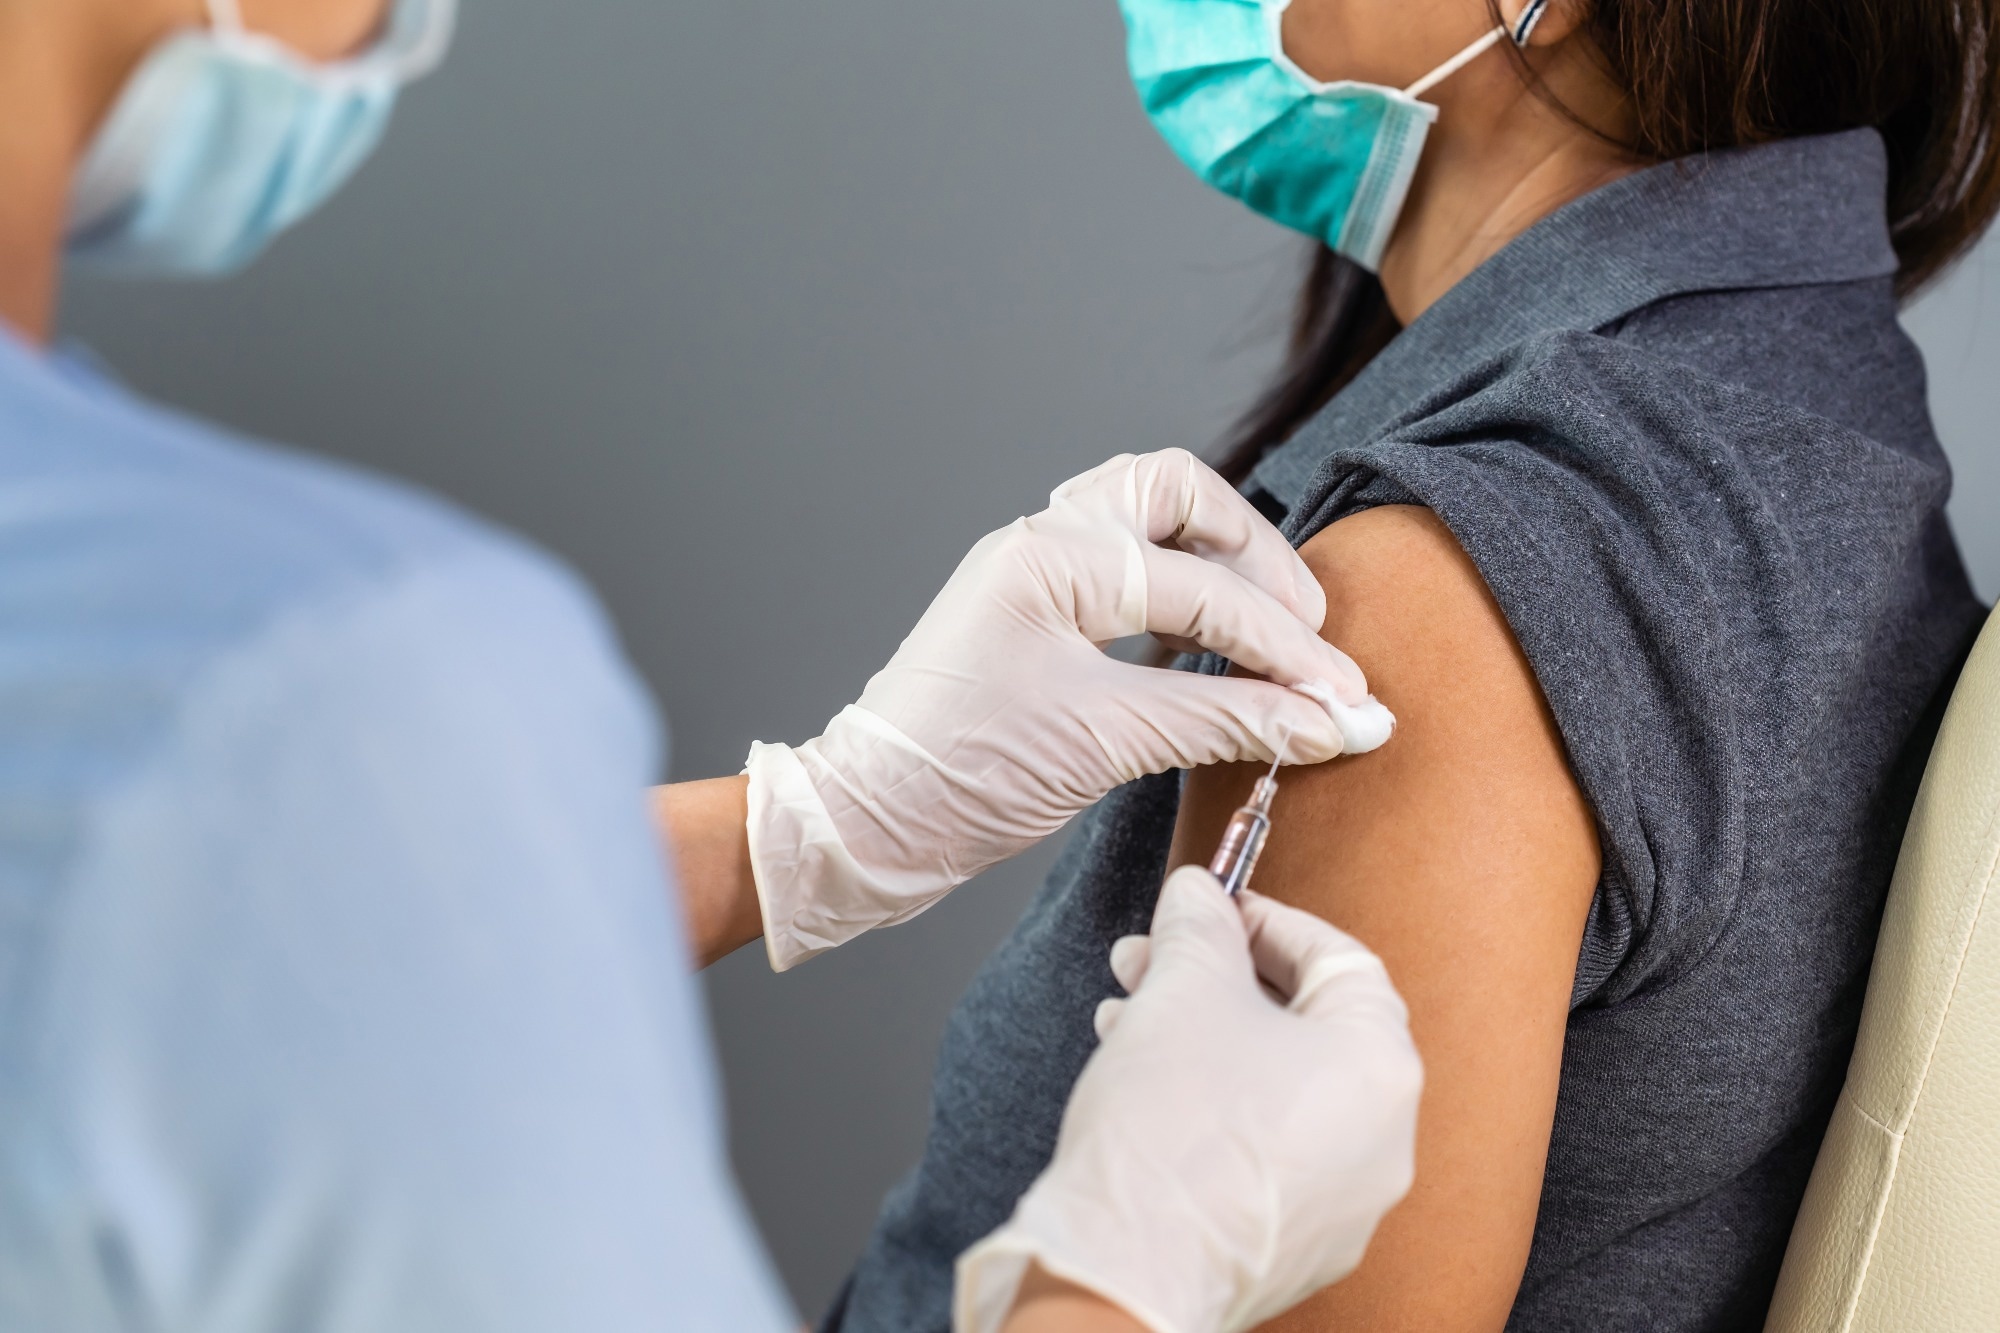 Study: Chatbot-Delivered Online Intervention to Promote Seasonal Influenza Vaccination During the COVID-19 Pandemic. Image Credit: BaLL LunLa/Shutterstock.com